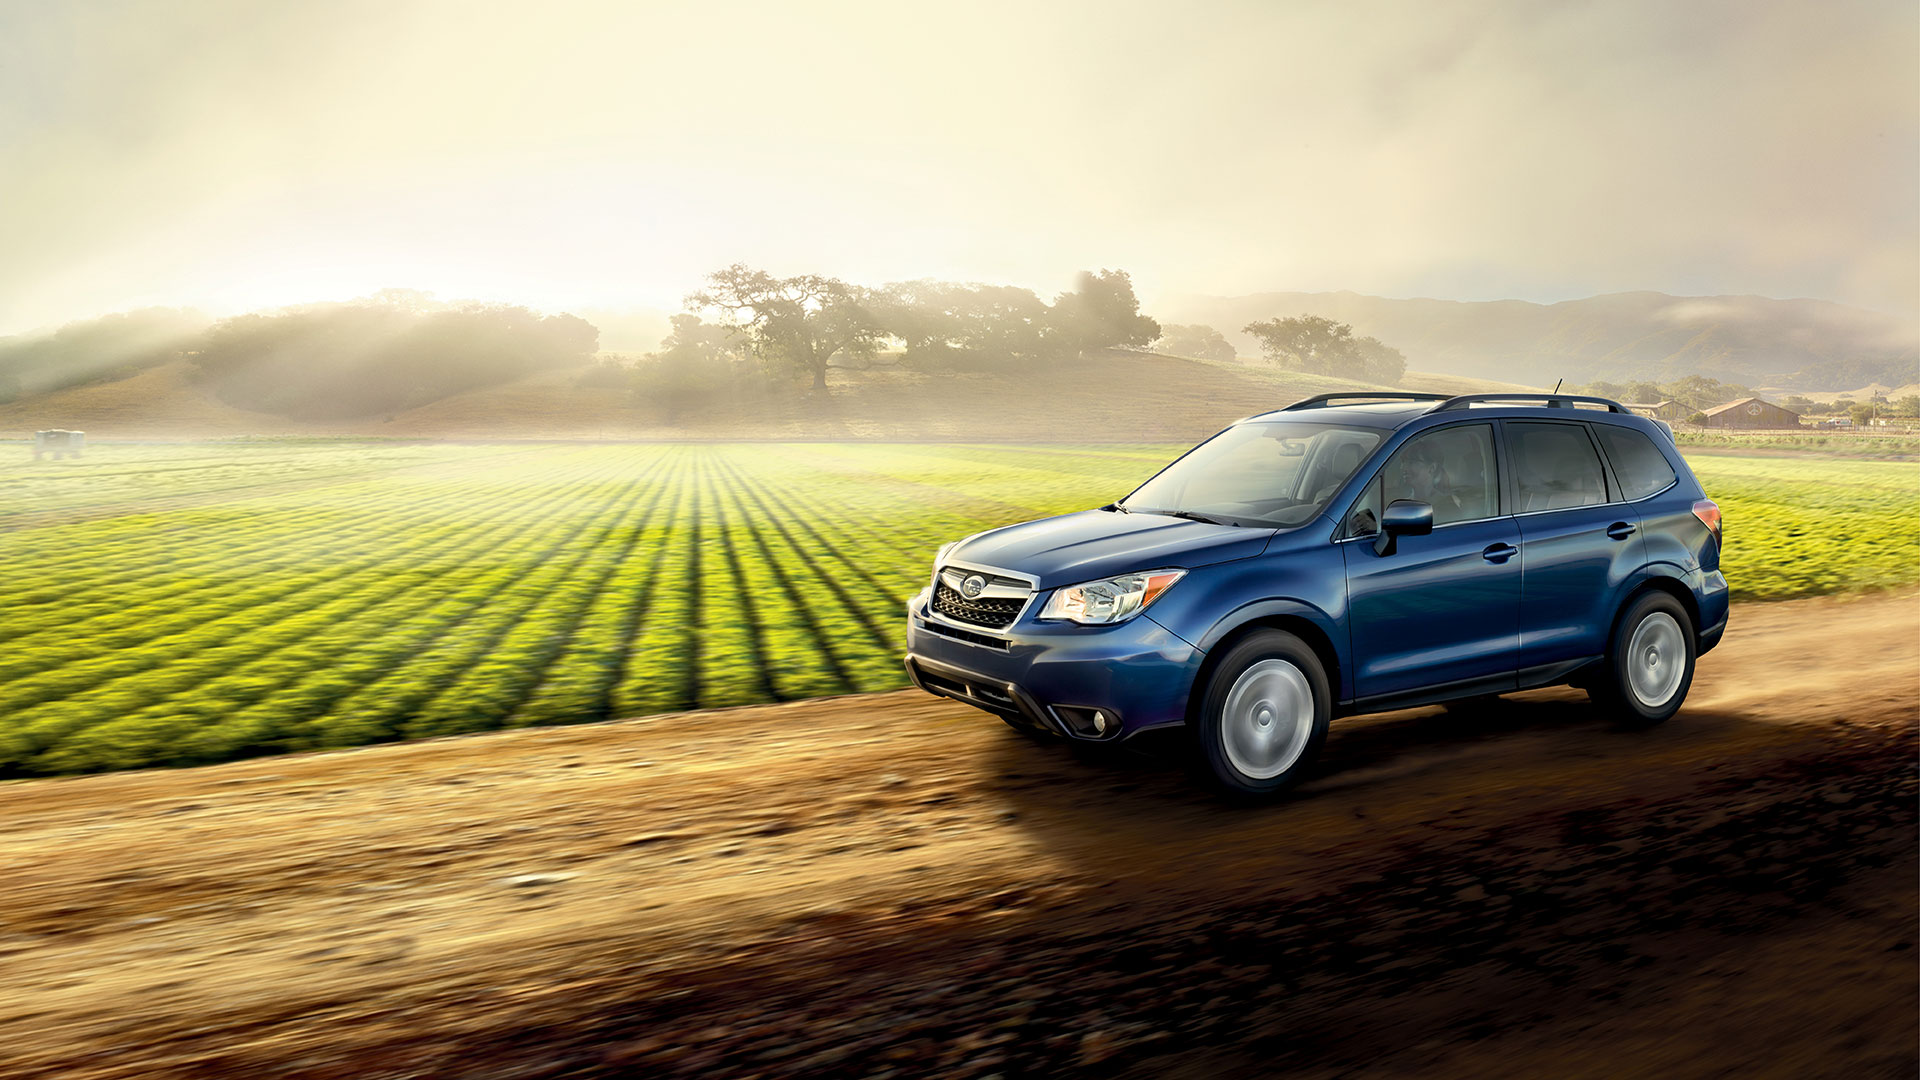 Subaru Forester Wallpaper And Background Image